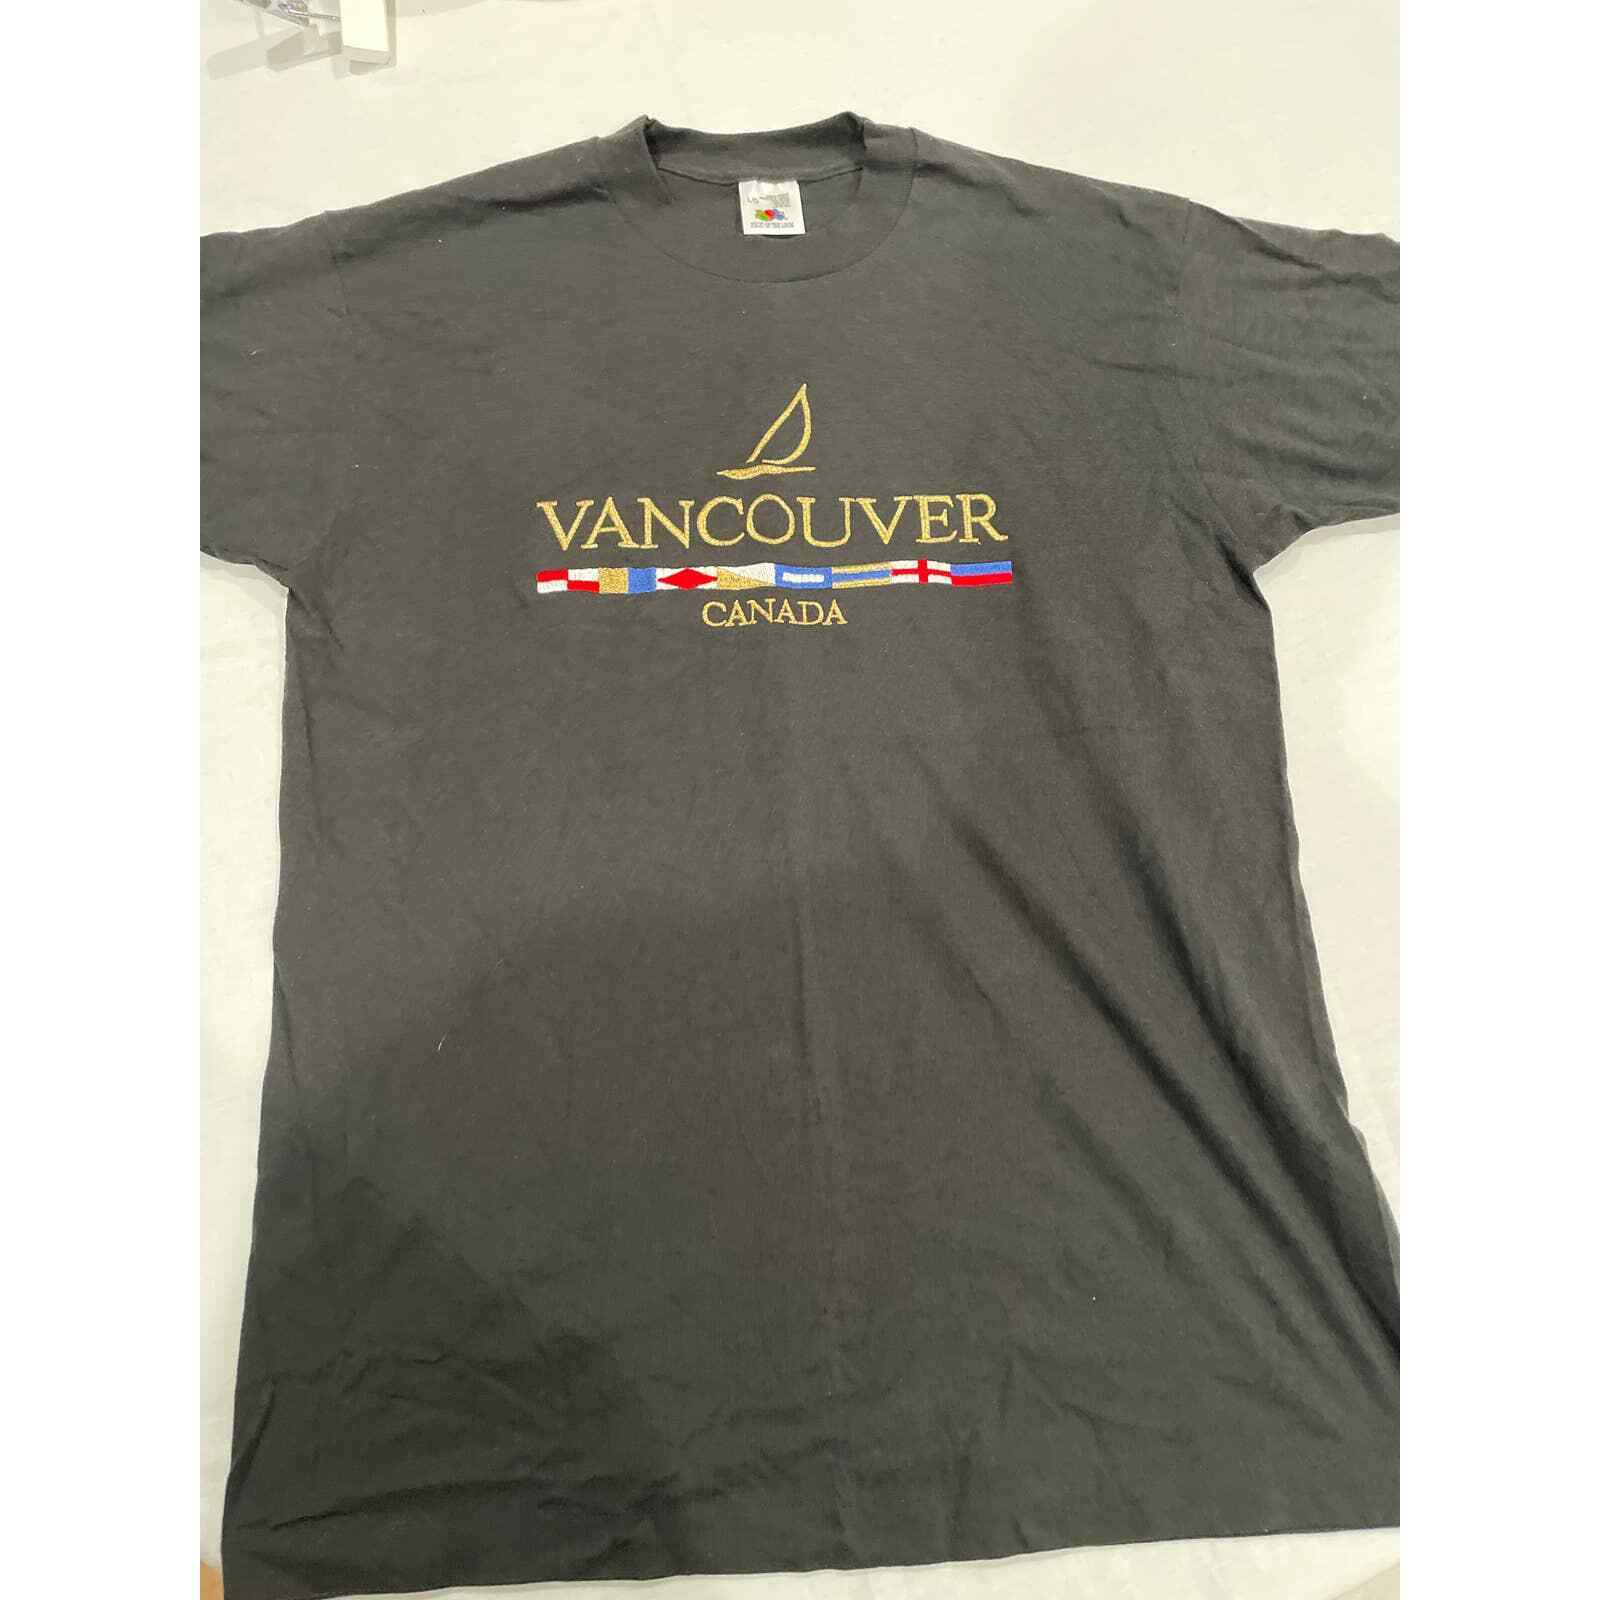 Vintage Vancouver Shirt Adult Large Black Canada Casual Mens Single Stitch 90s